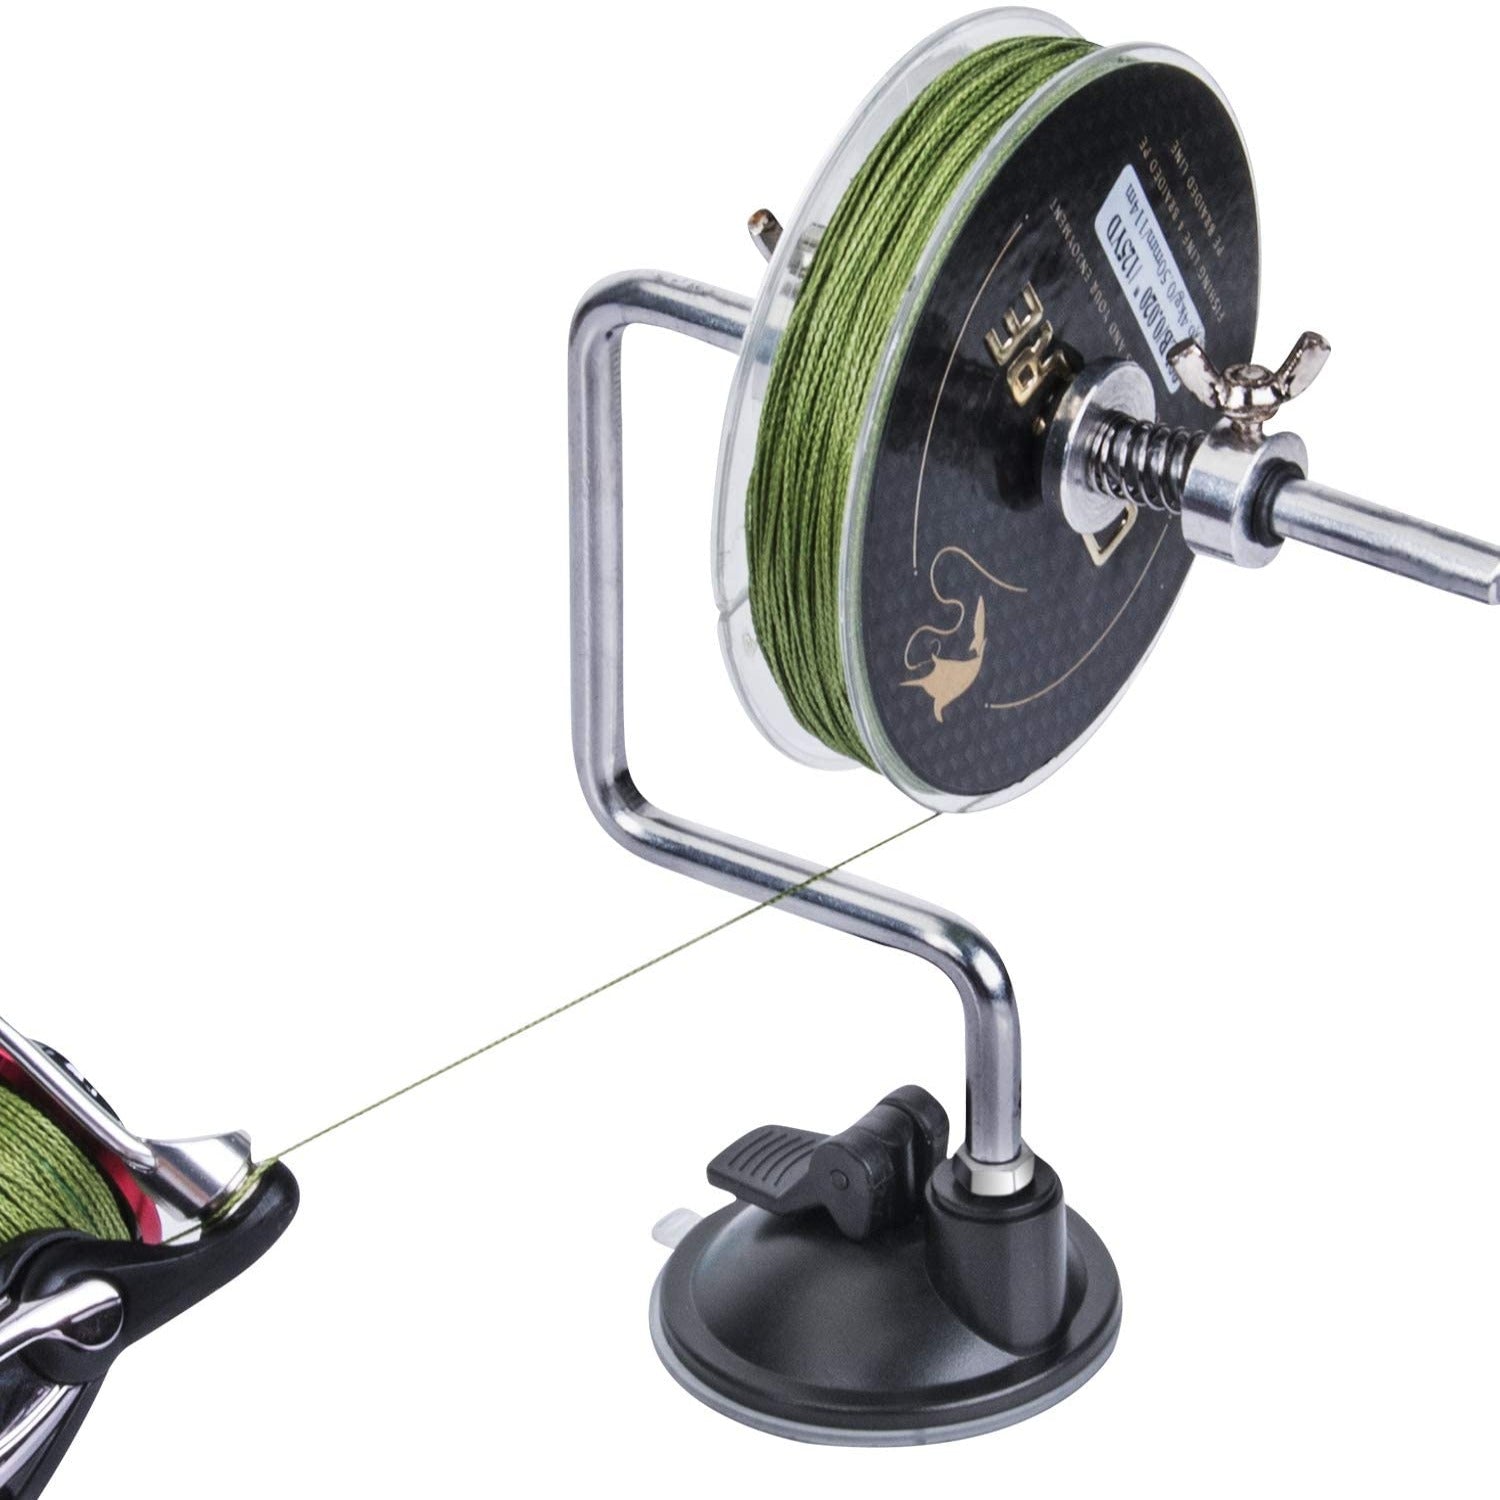 Goture Portable Fishing Line Winder Reel Spooler System with Suction C